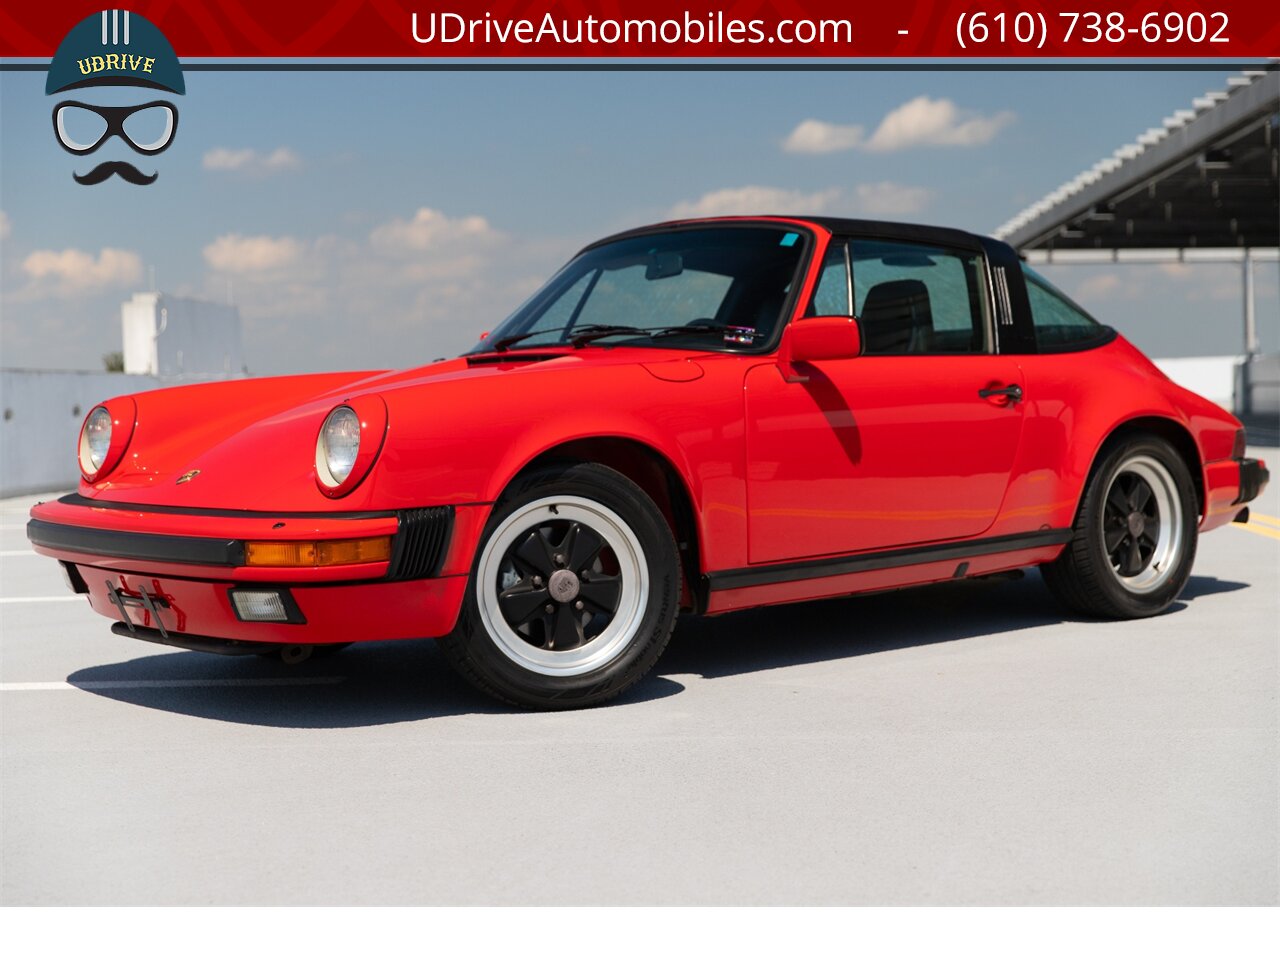 1986 Porsche 911 Carrera Targa 39k Miles Same Owner Since 1988  $23k in Service History Since 2011 - Photo 1 - West Chester, PA 19382